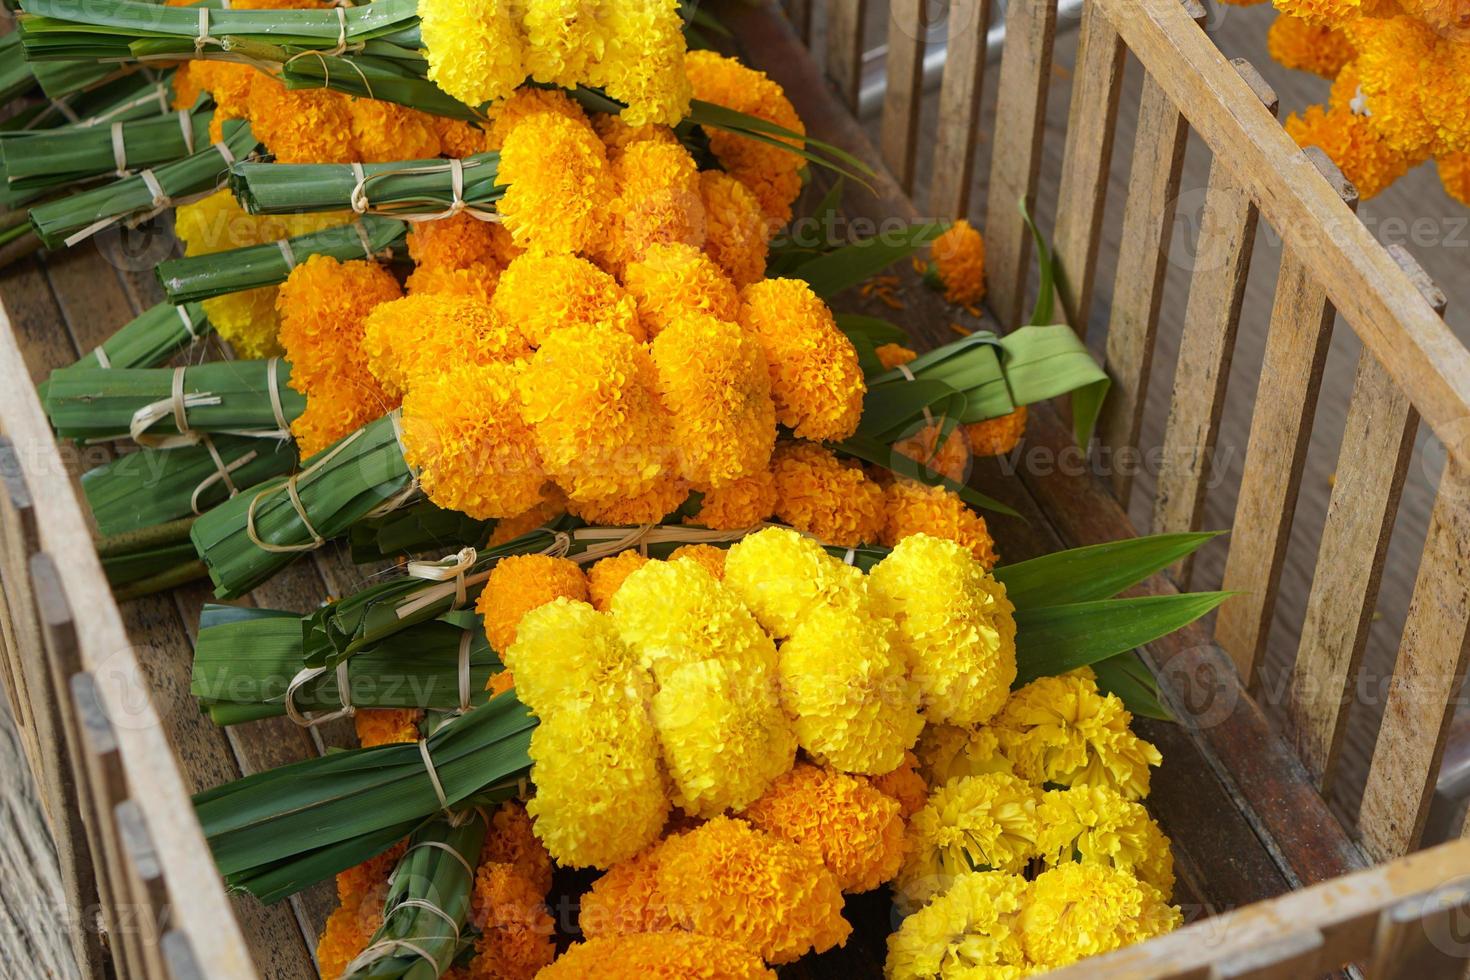 Marigolds, lotus flowers are brought to pay homage to the Lord Buddha. photo